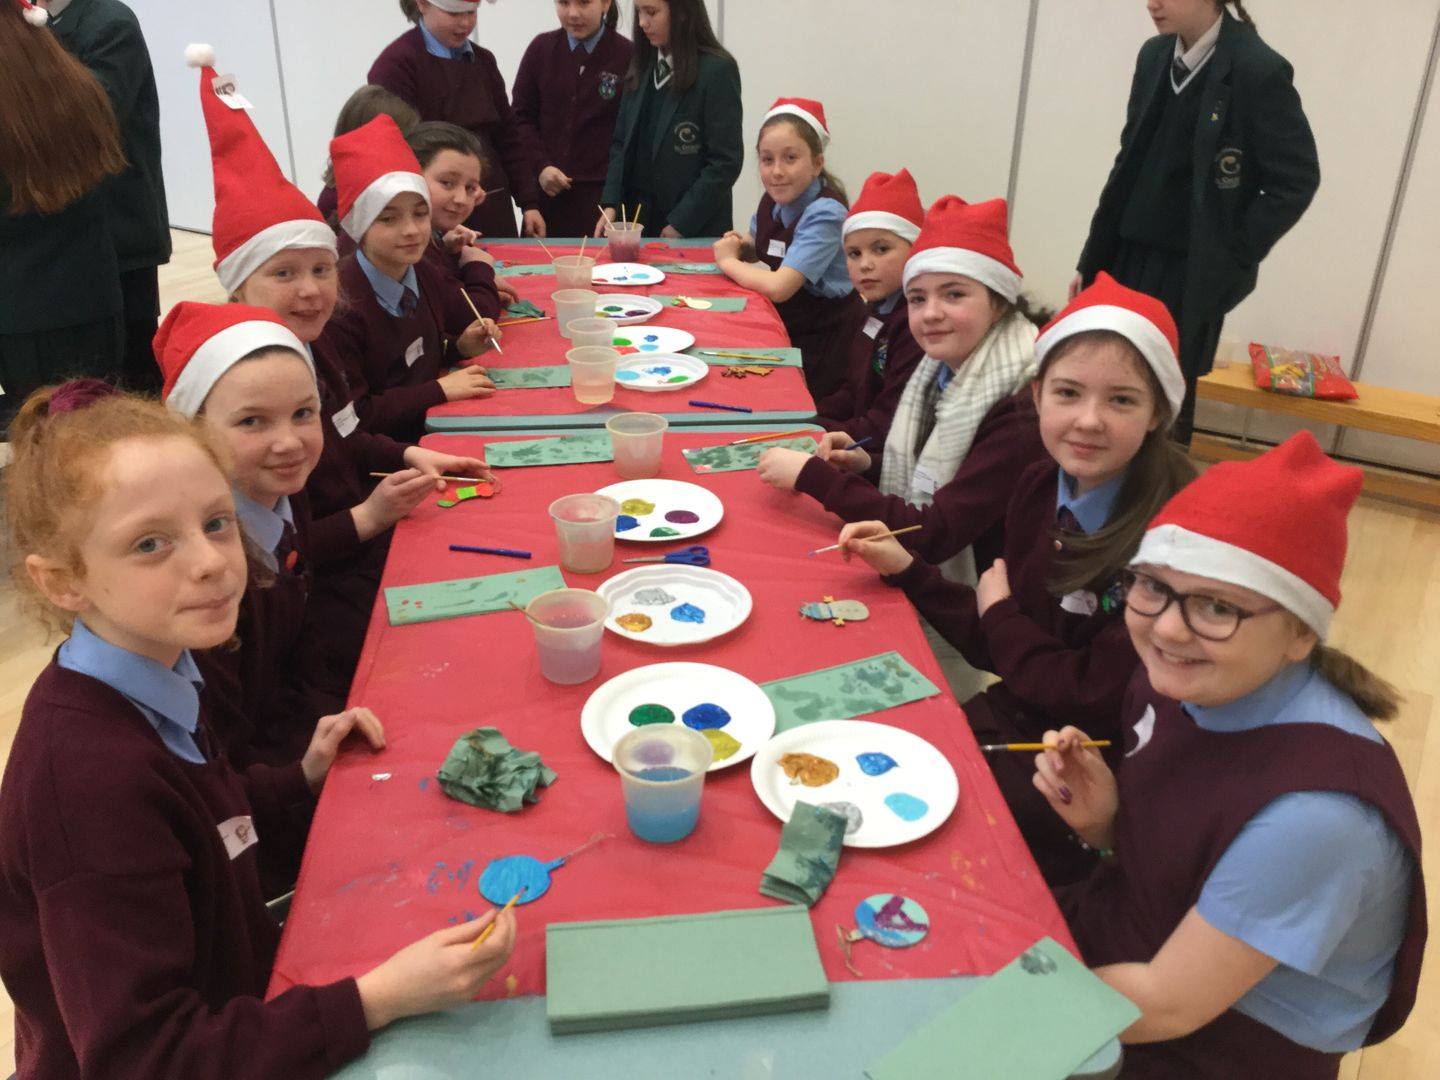 Year 7 girls at St. Cecilia's Christmas Workshop